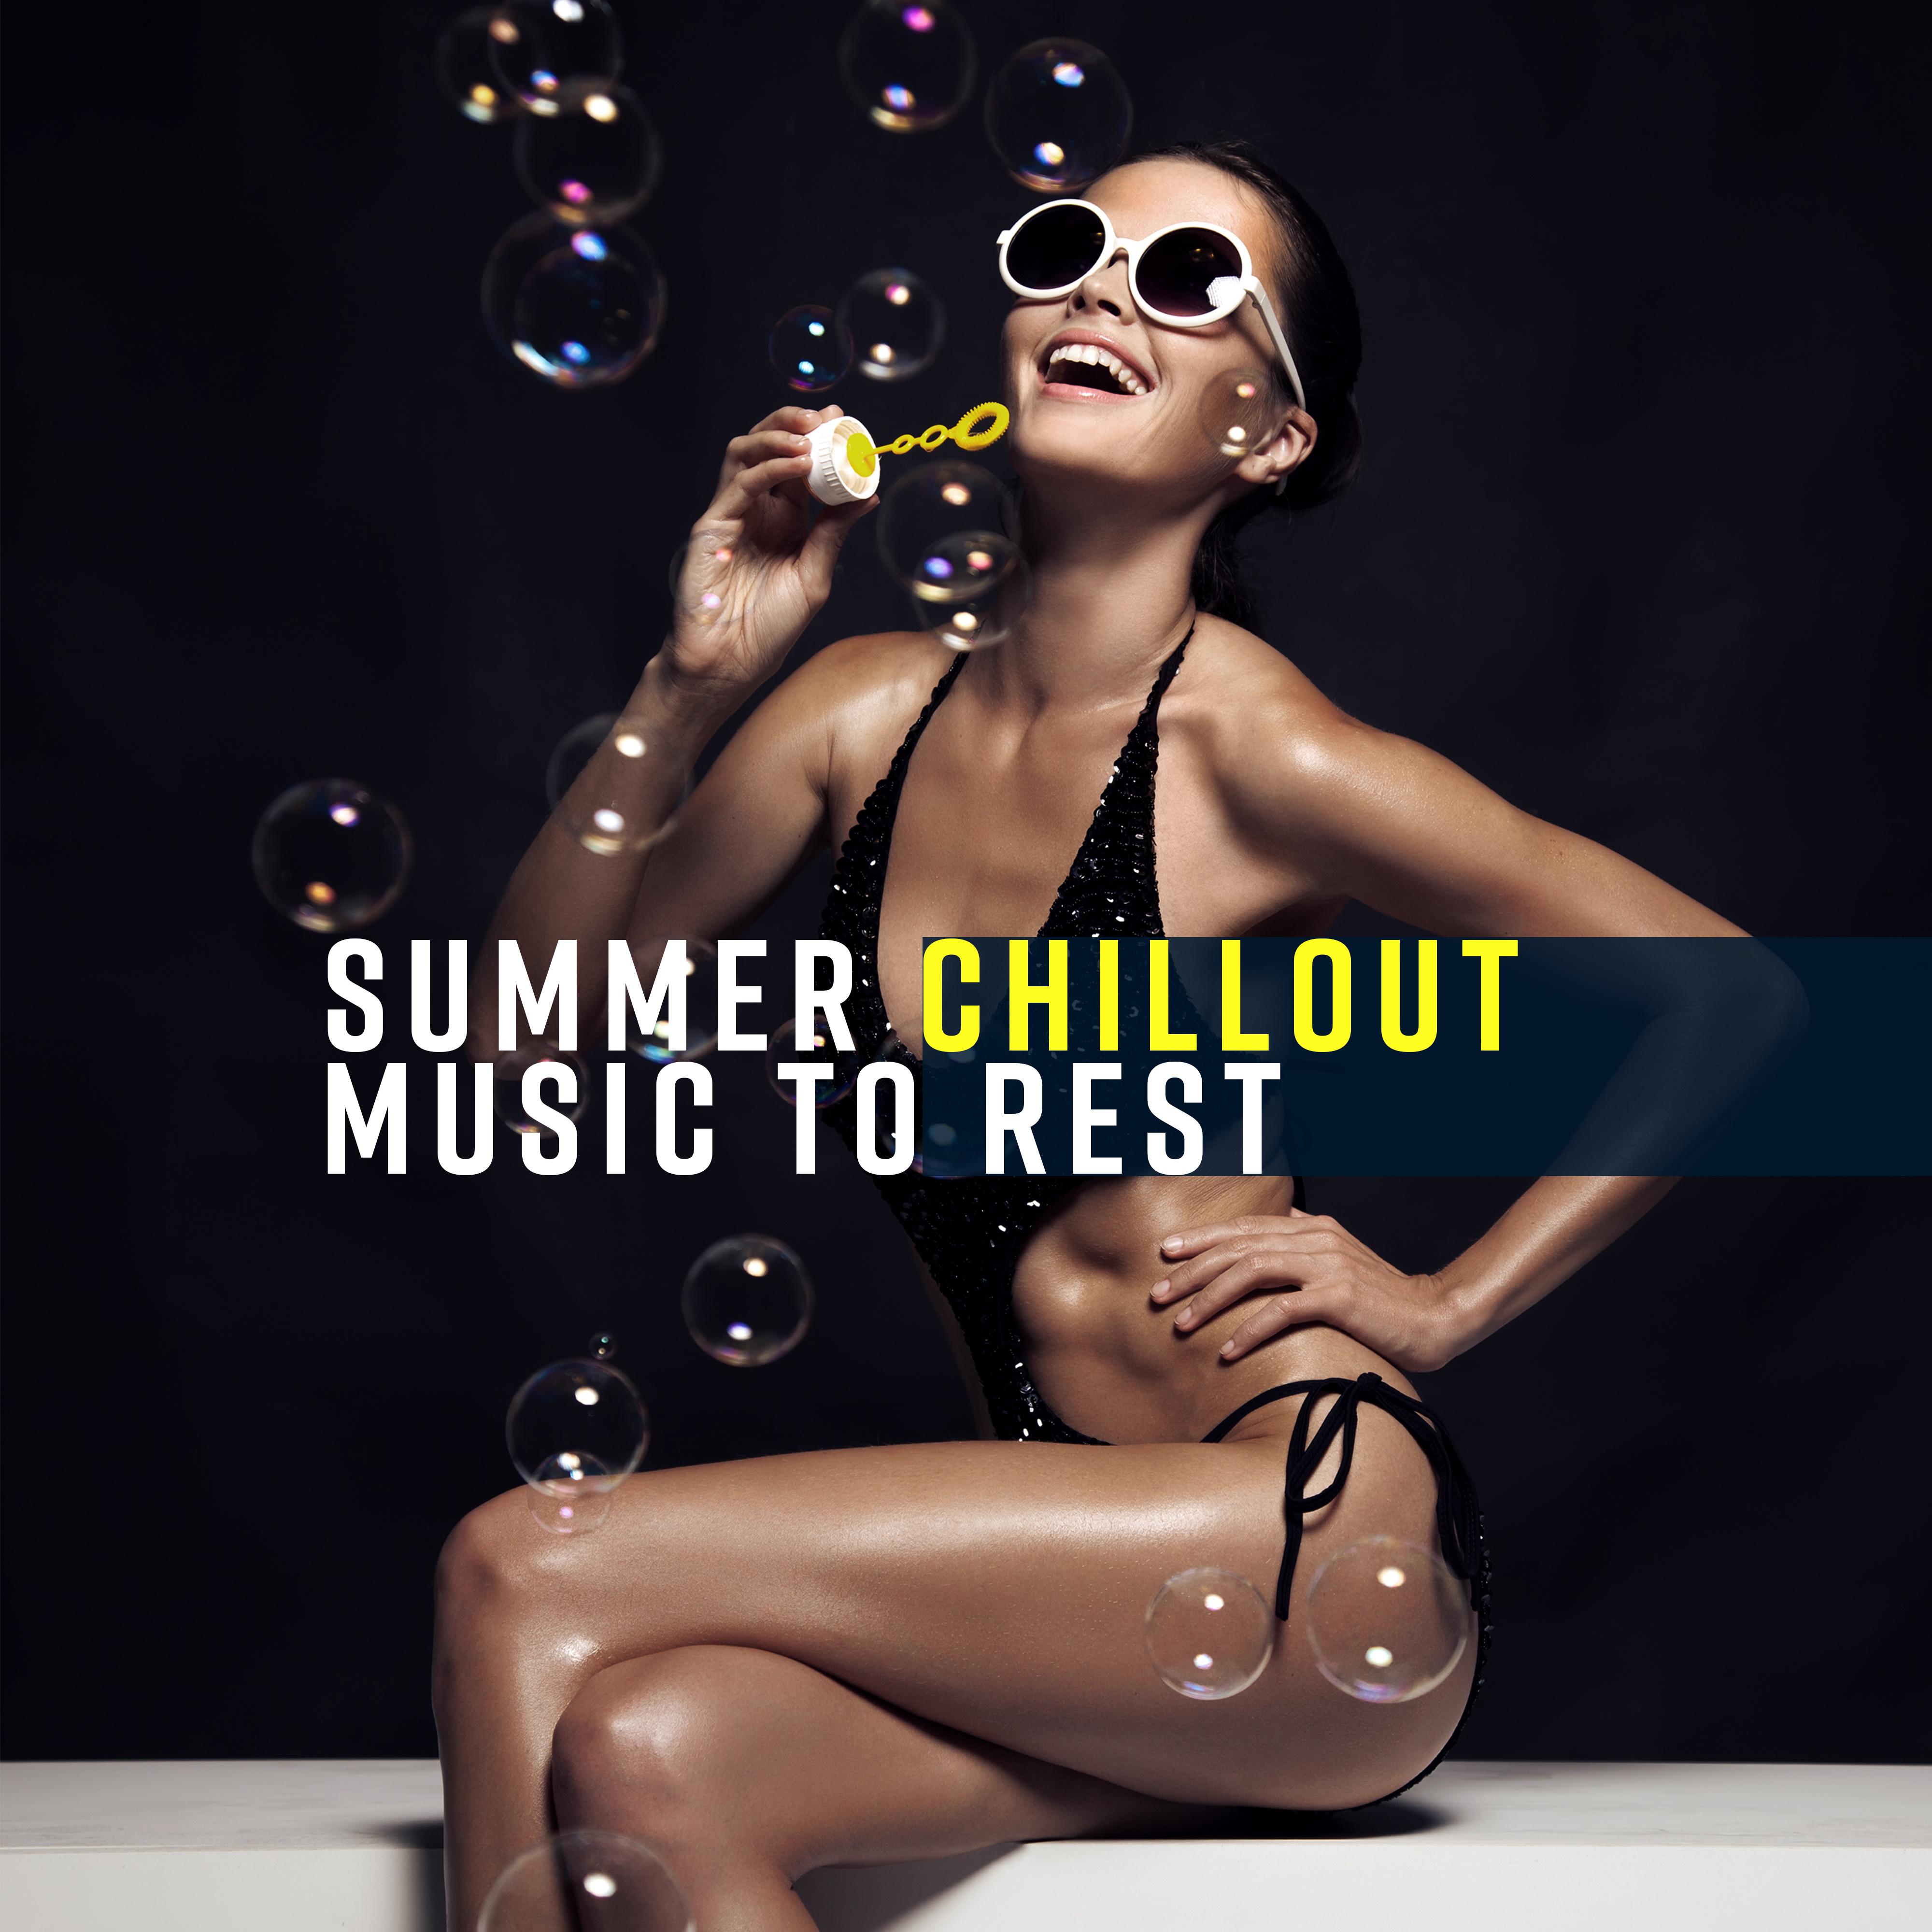 Summer Chillout Music to Rest